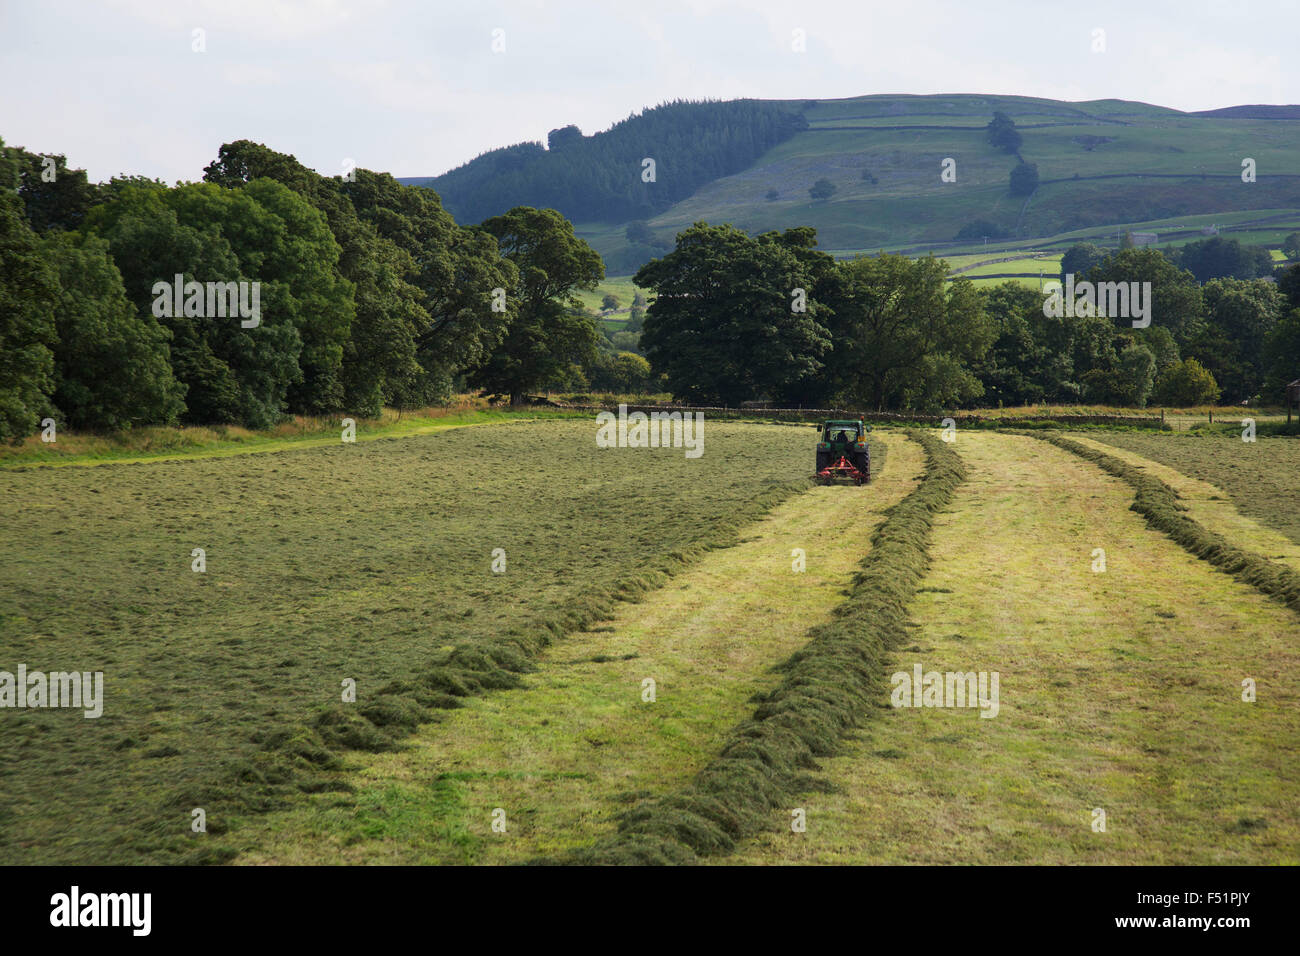 Farmer using a tractor to gather hay on the last day before rain is expected in his field in Reeth at Swaledale. Yorkshire, England, UK. This is a farming area where rural living and the countryside is at the centre of life in this county. Swaledale runs broadly from west to east. To the south and east of the ridge a number of smaller dales. Swaledale is a typical limestone Yorkshire dale, with its narrow valley-bottom road, green meadows and fellside fields, white sheep and dry stone walls on the glacier-formed valley sides, and darker moorland skyline. Stock Photo